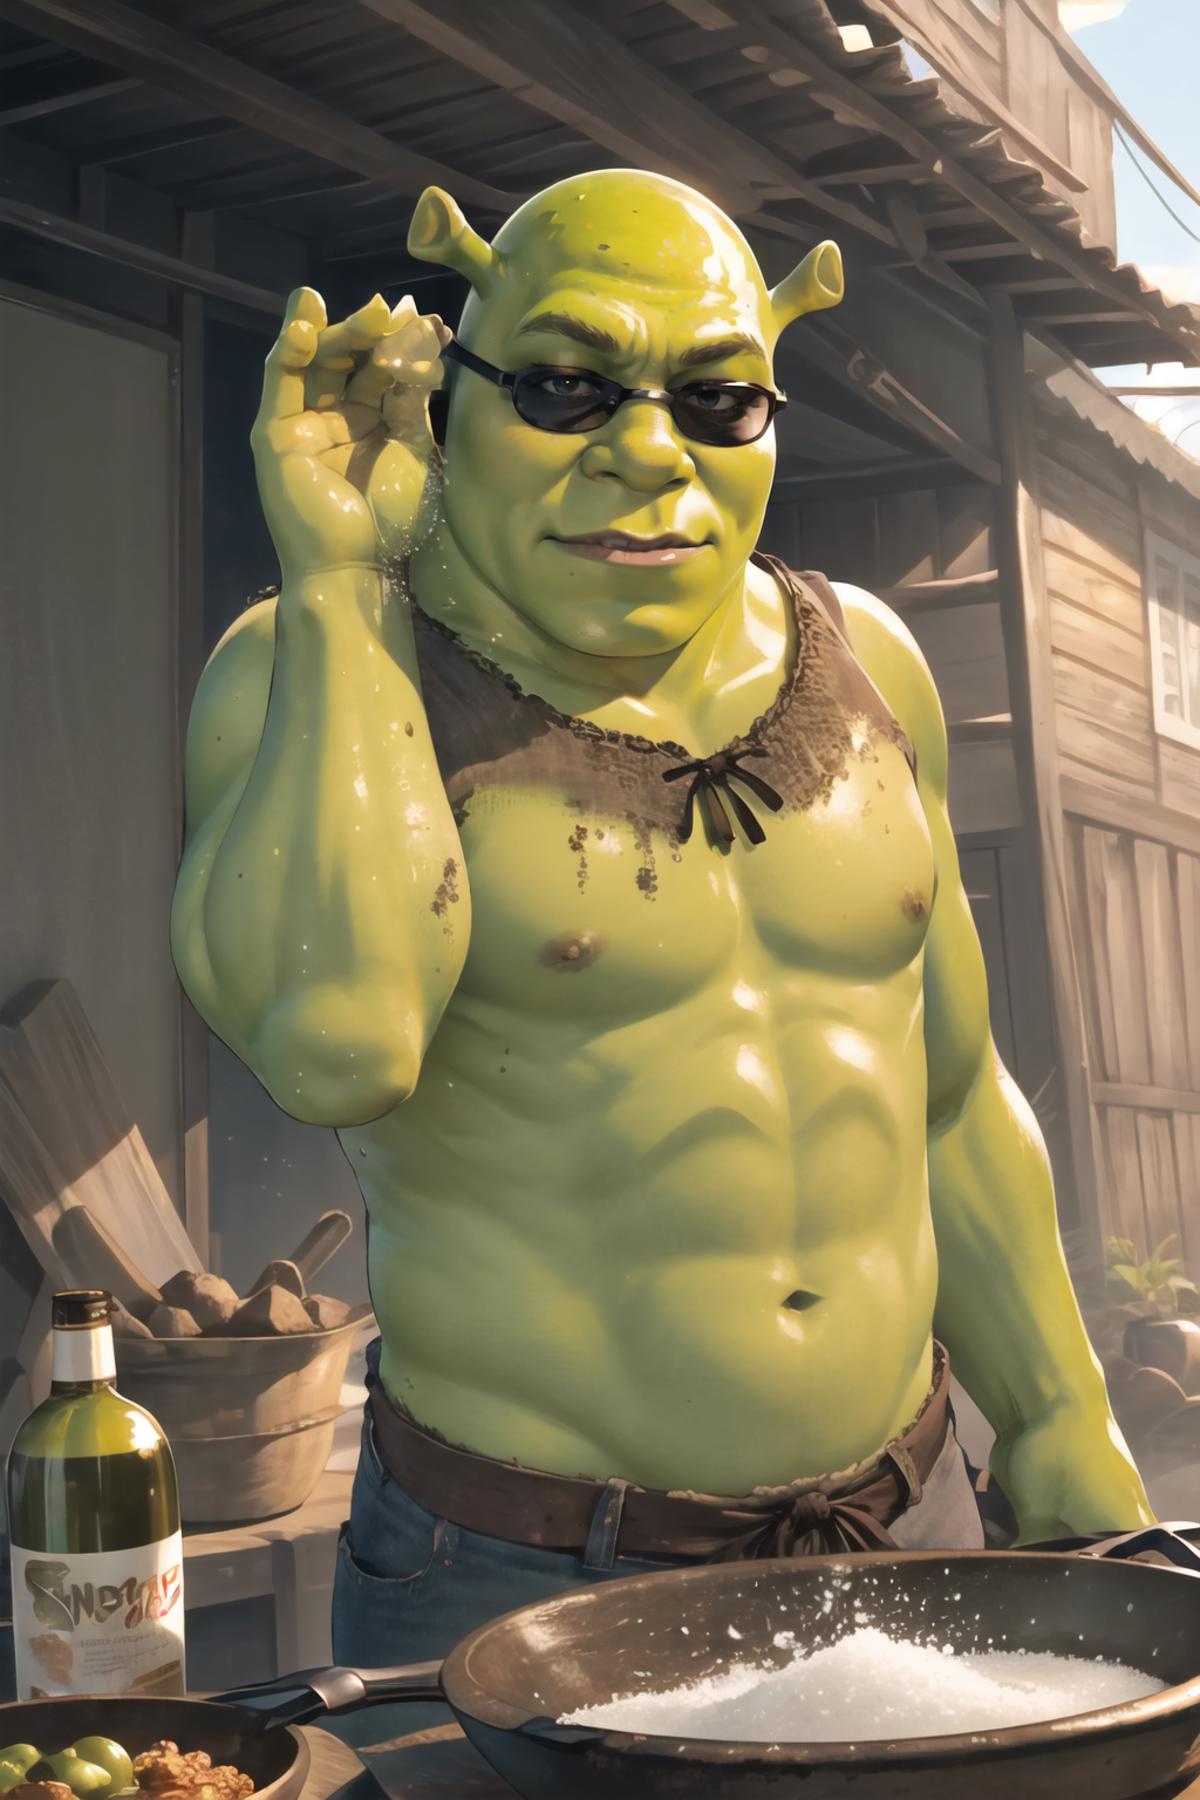 A cartoon or 3D model of a shirtless Shrek, wearing sunglasses and holding a cell phone.